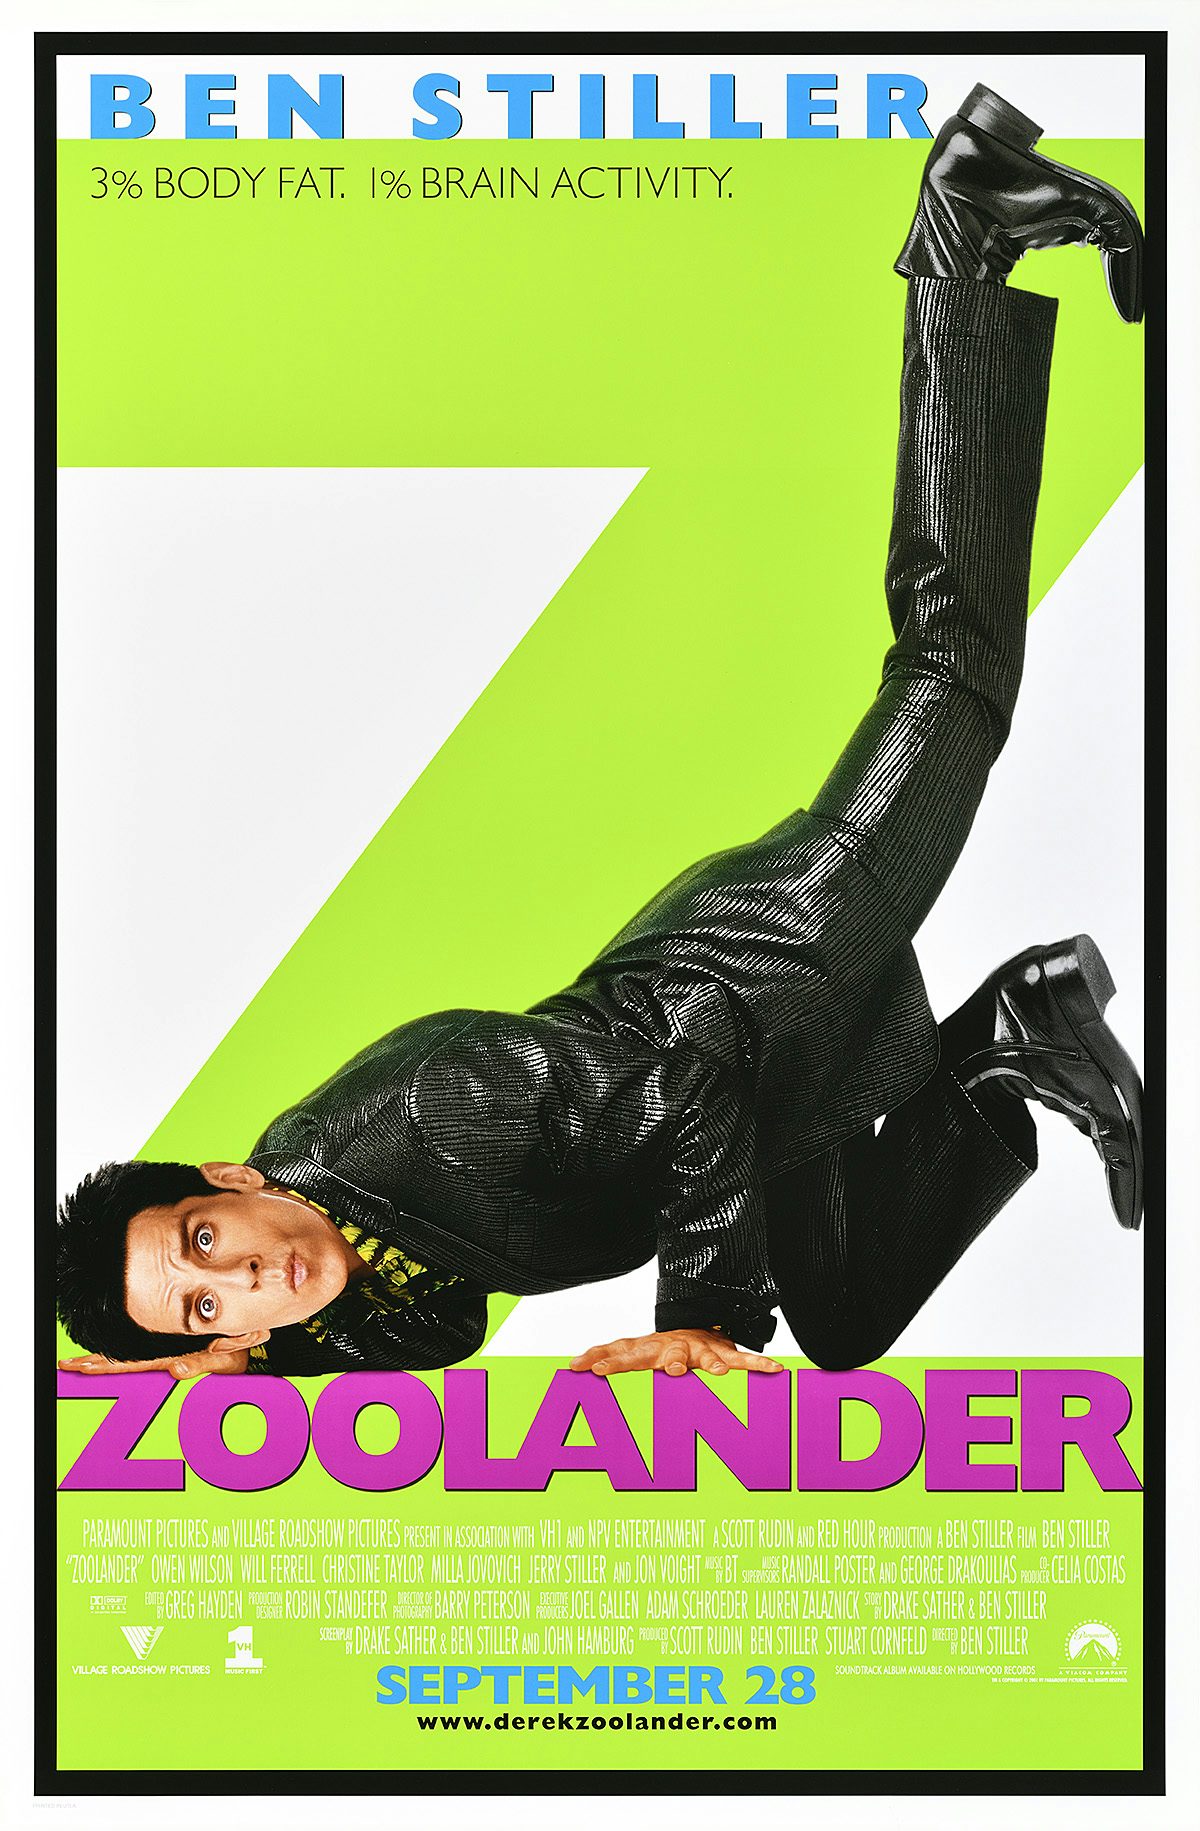 Poster design for Zoolander showing a photo of star Ben Stiller wearing a shiny black suit, appearing to lean upside down on top of the film title, Zoolander, in pink text along the bottom of the poster. The poster copy reads '3% body fat, 1% brain activity'